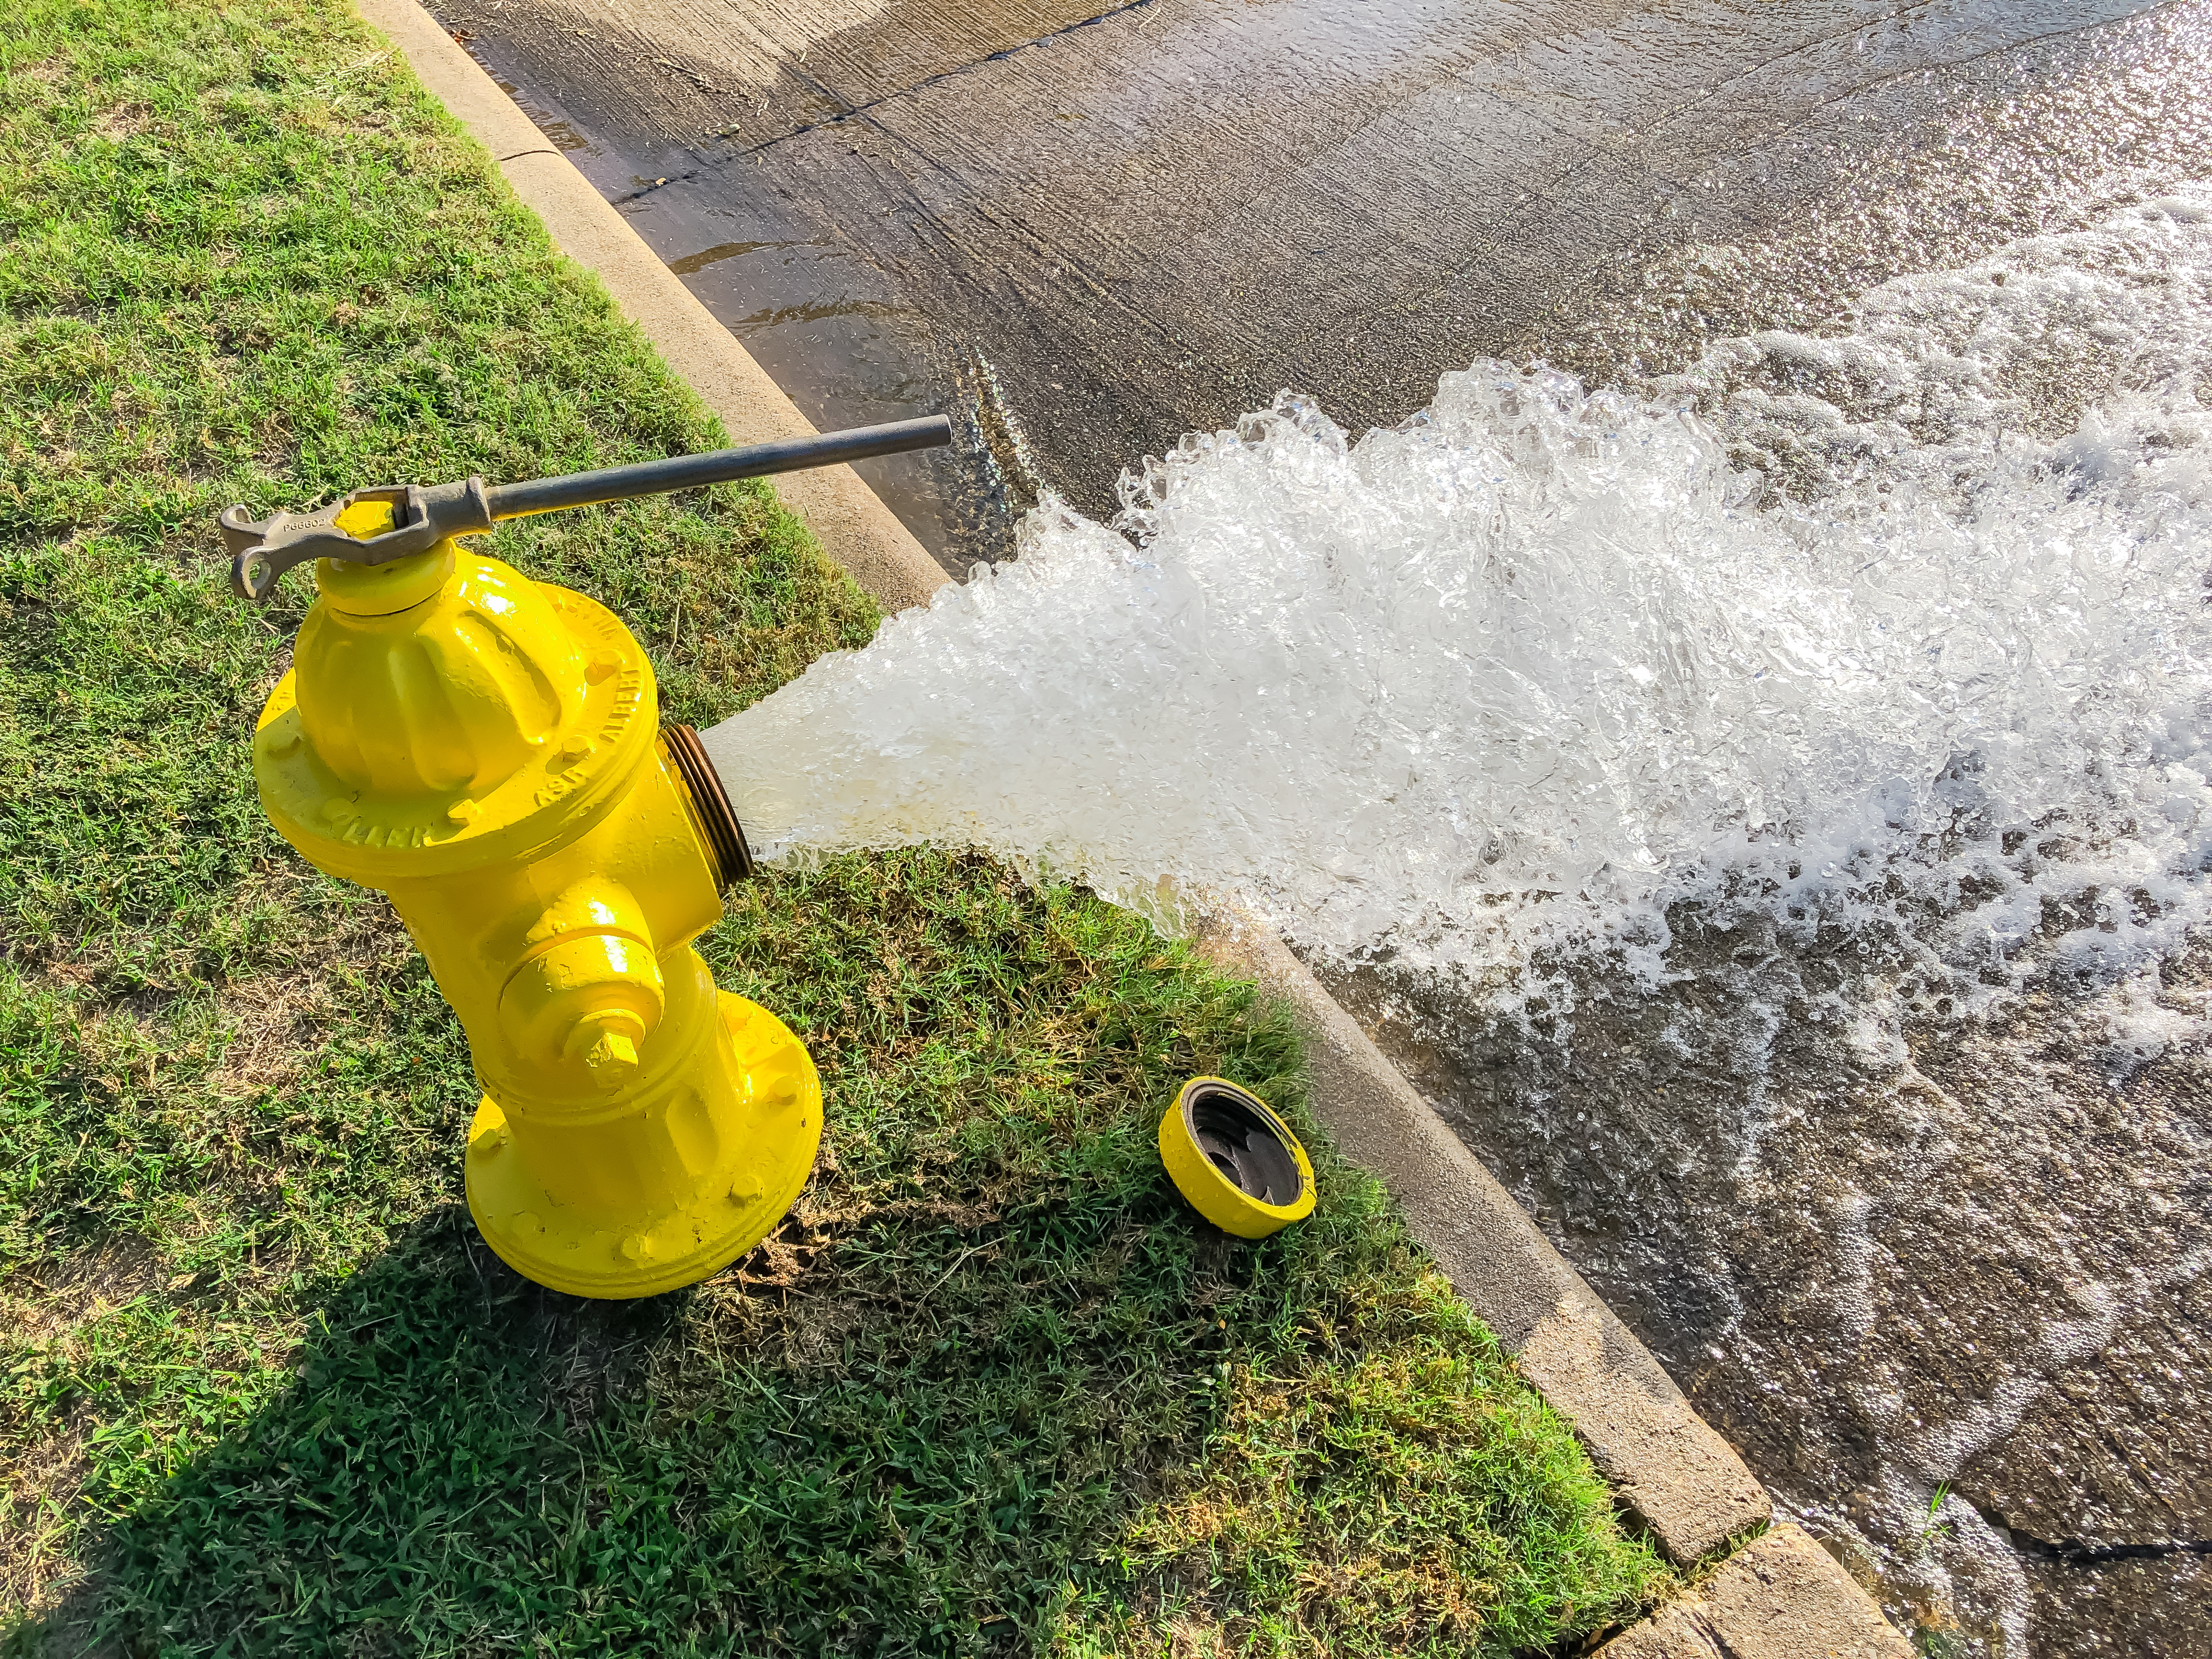  Flushing fire hydrants in traditional water systems can waste excess water while maintaining chlorine levels. 